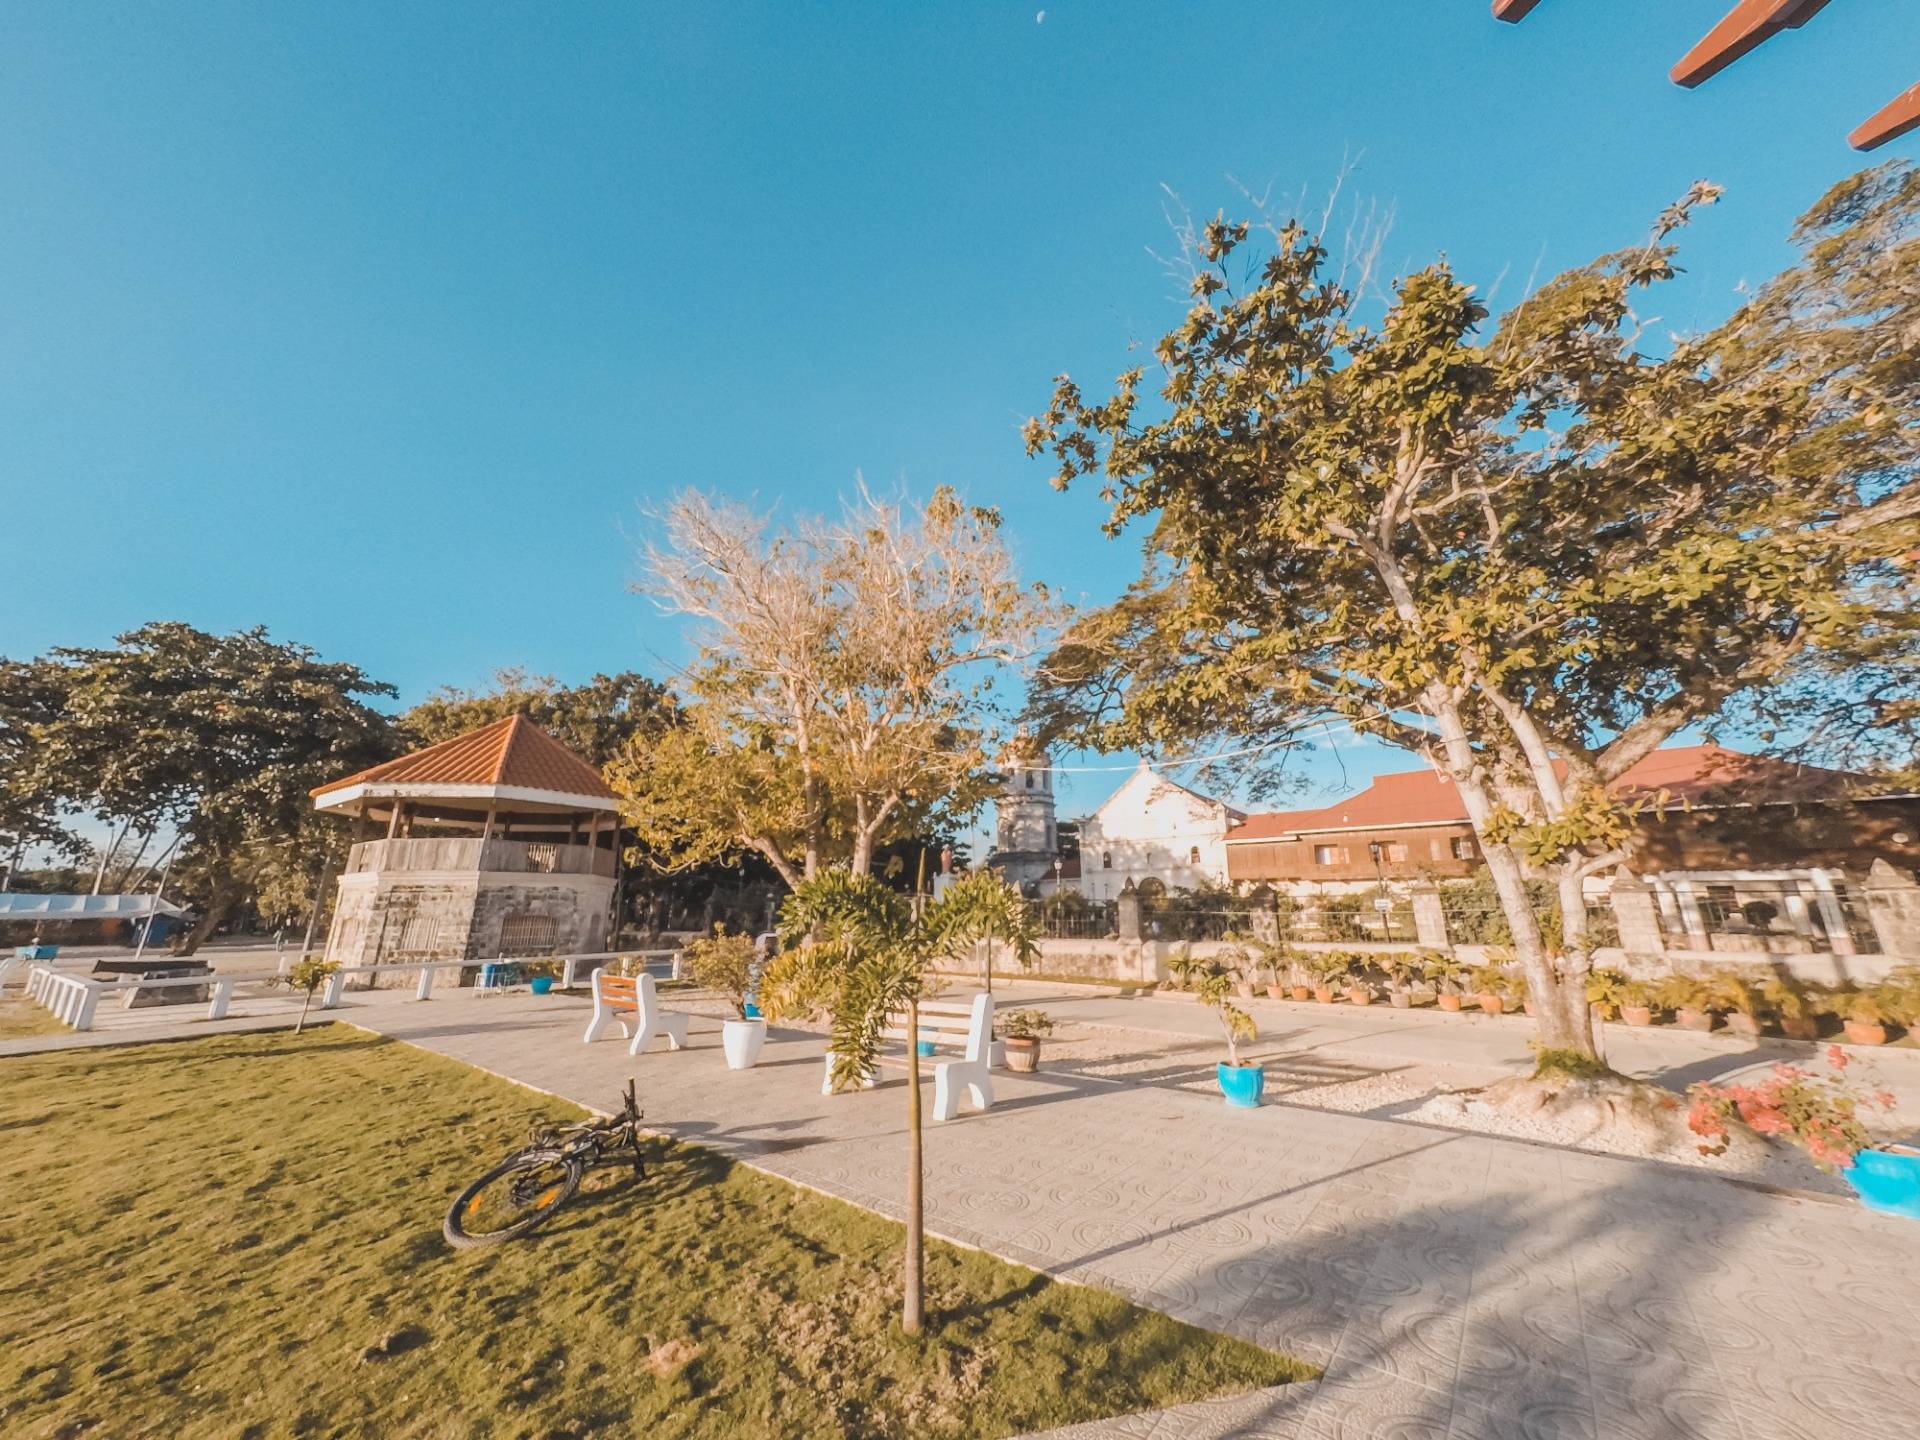 shot with GoPro Hero 5 (Side VDalaguete Plaza) photography by me